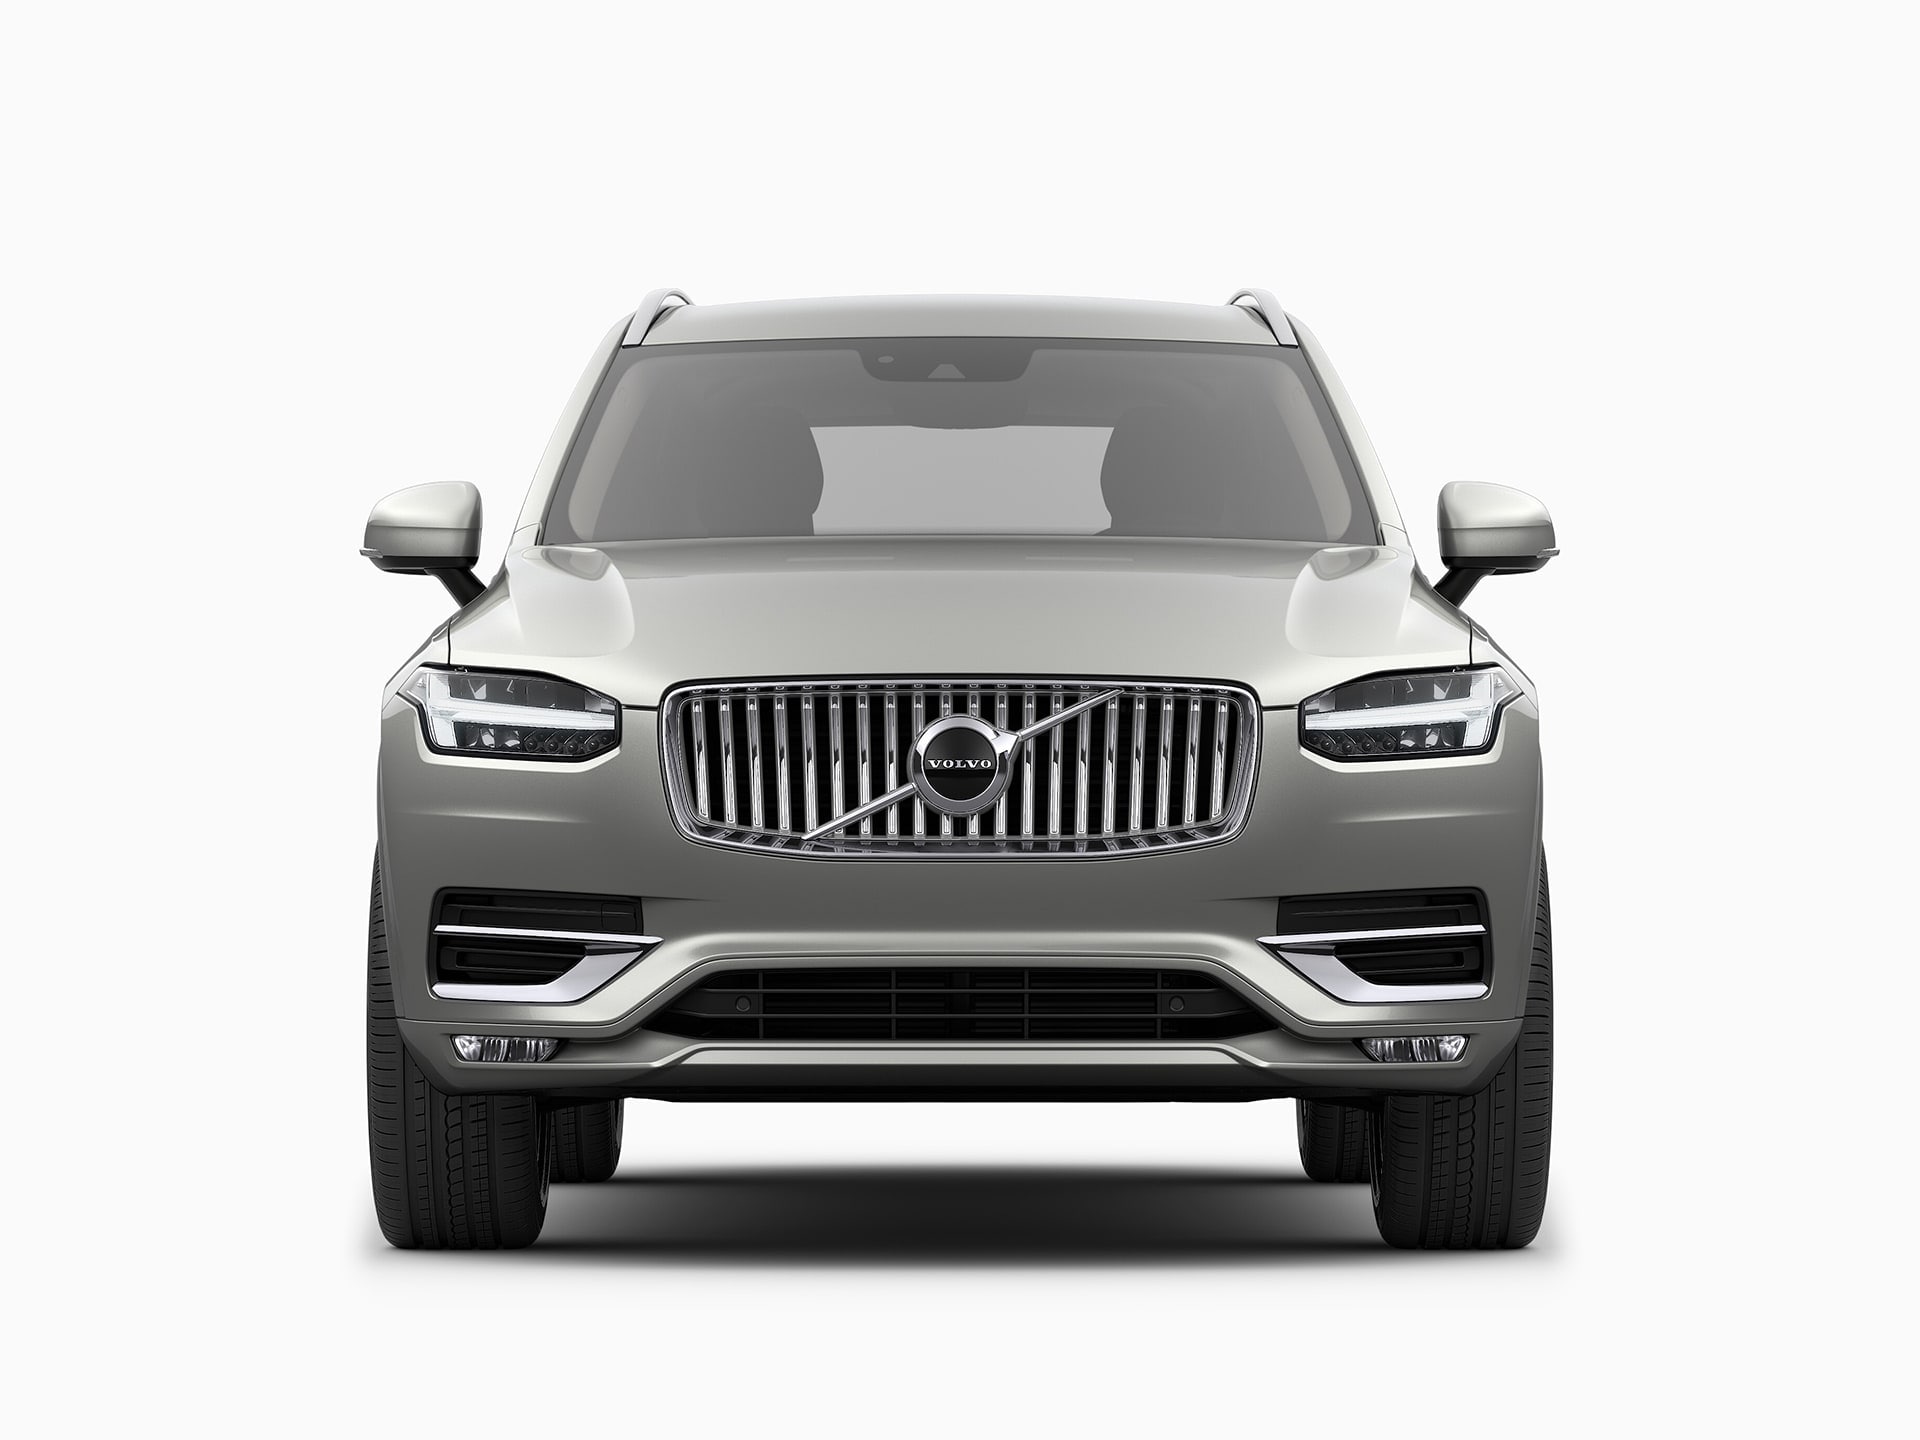 The front of a Volvo XC90 SUV.